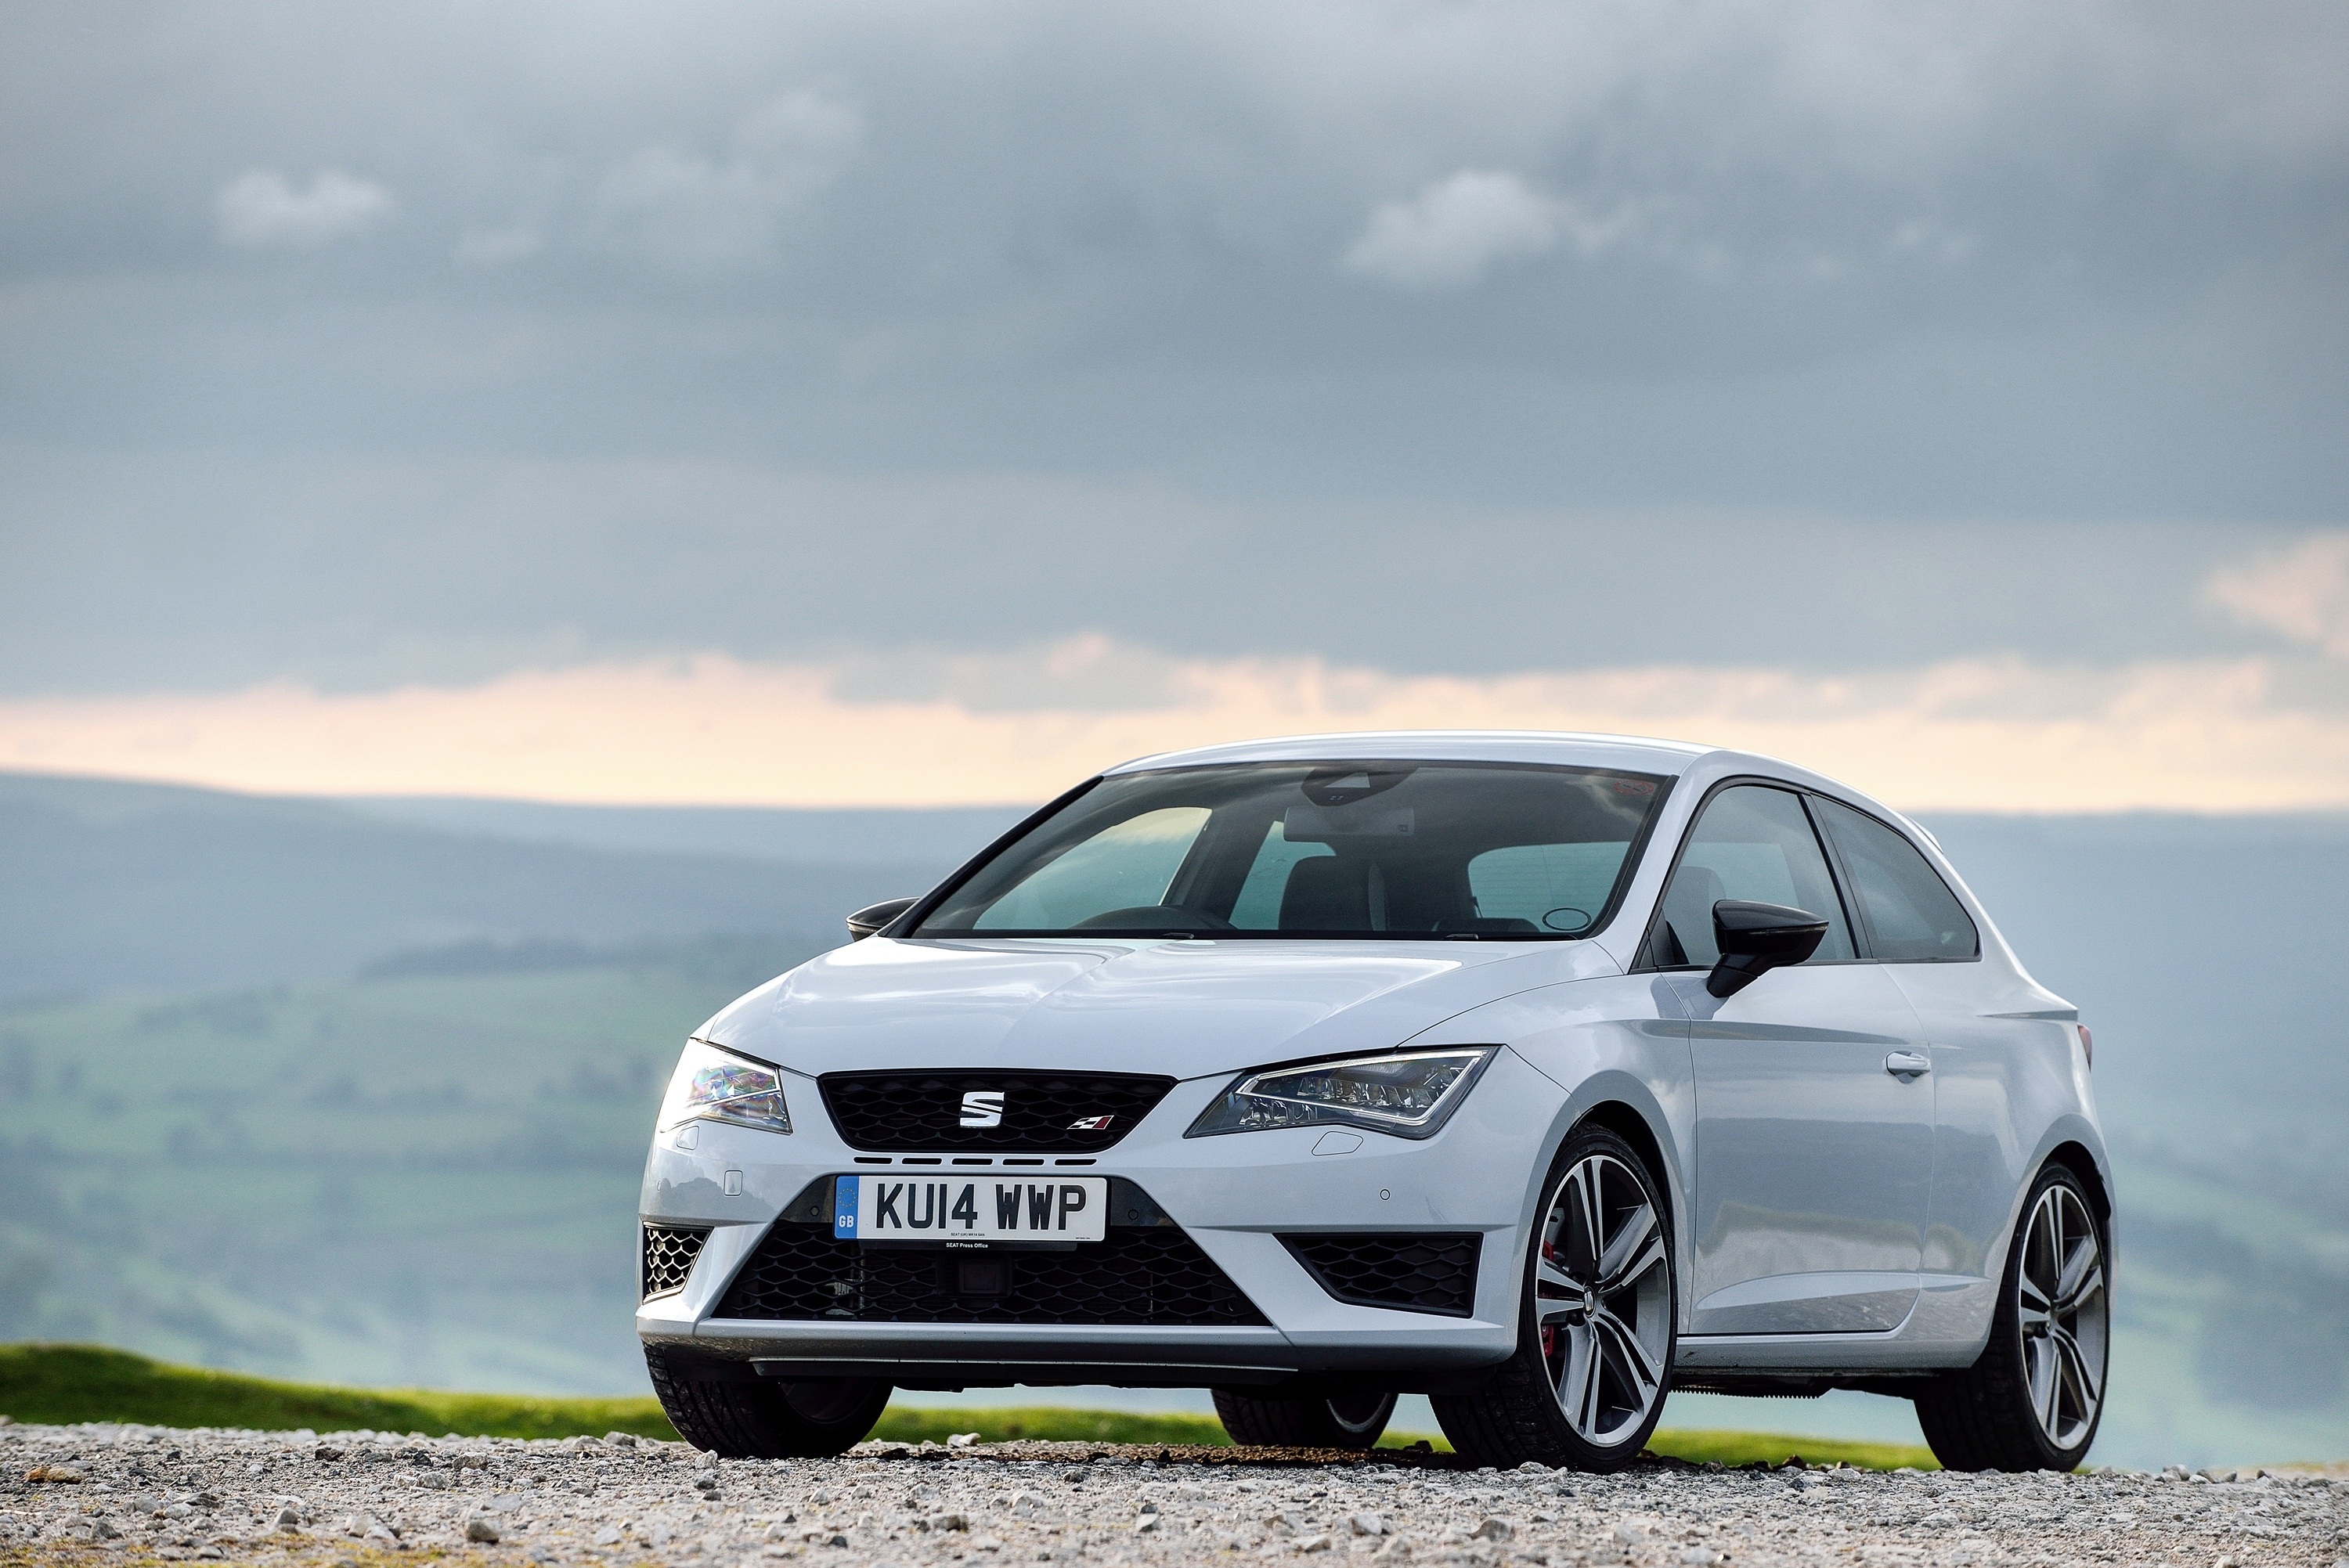 Seat is set to make a triumphant return just months after it was feared discontinued